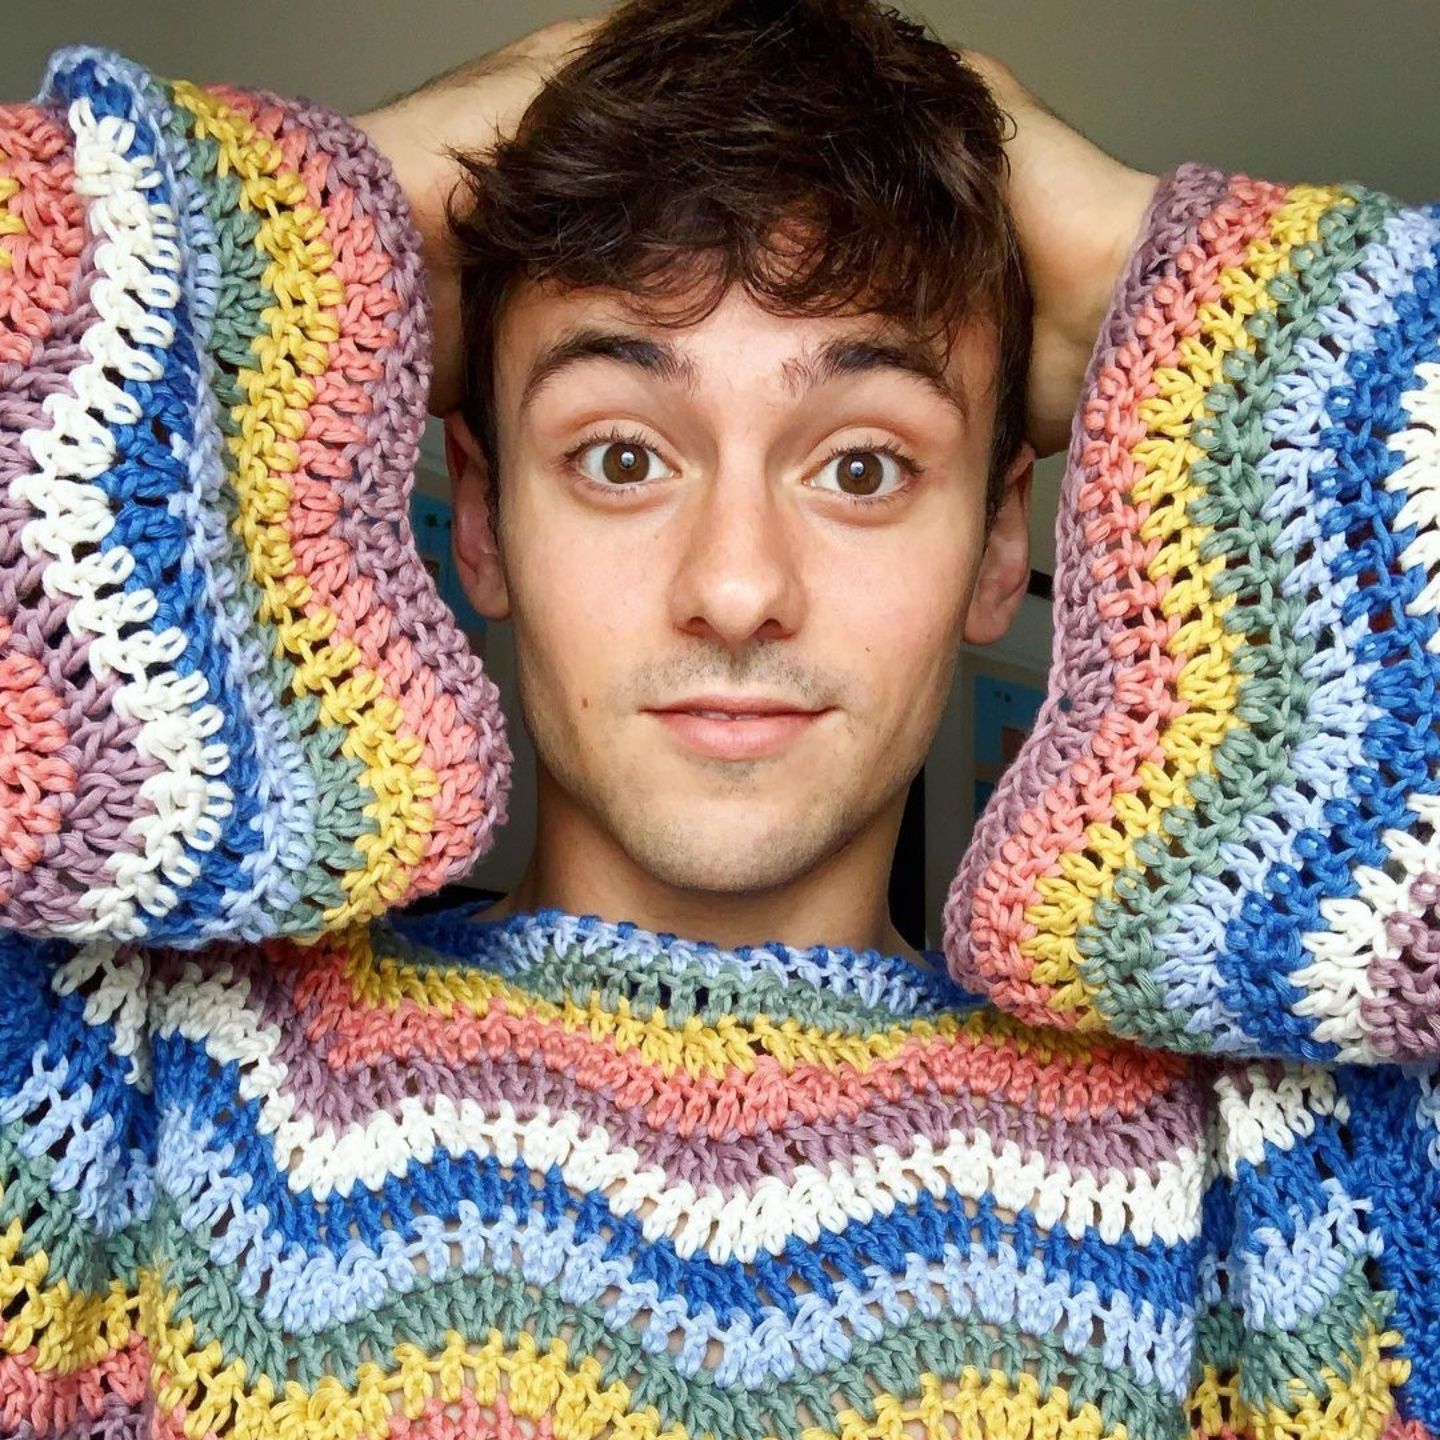 Get crafty like Tom Daley: 7 knit and crochet kits for inspired beginners